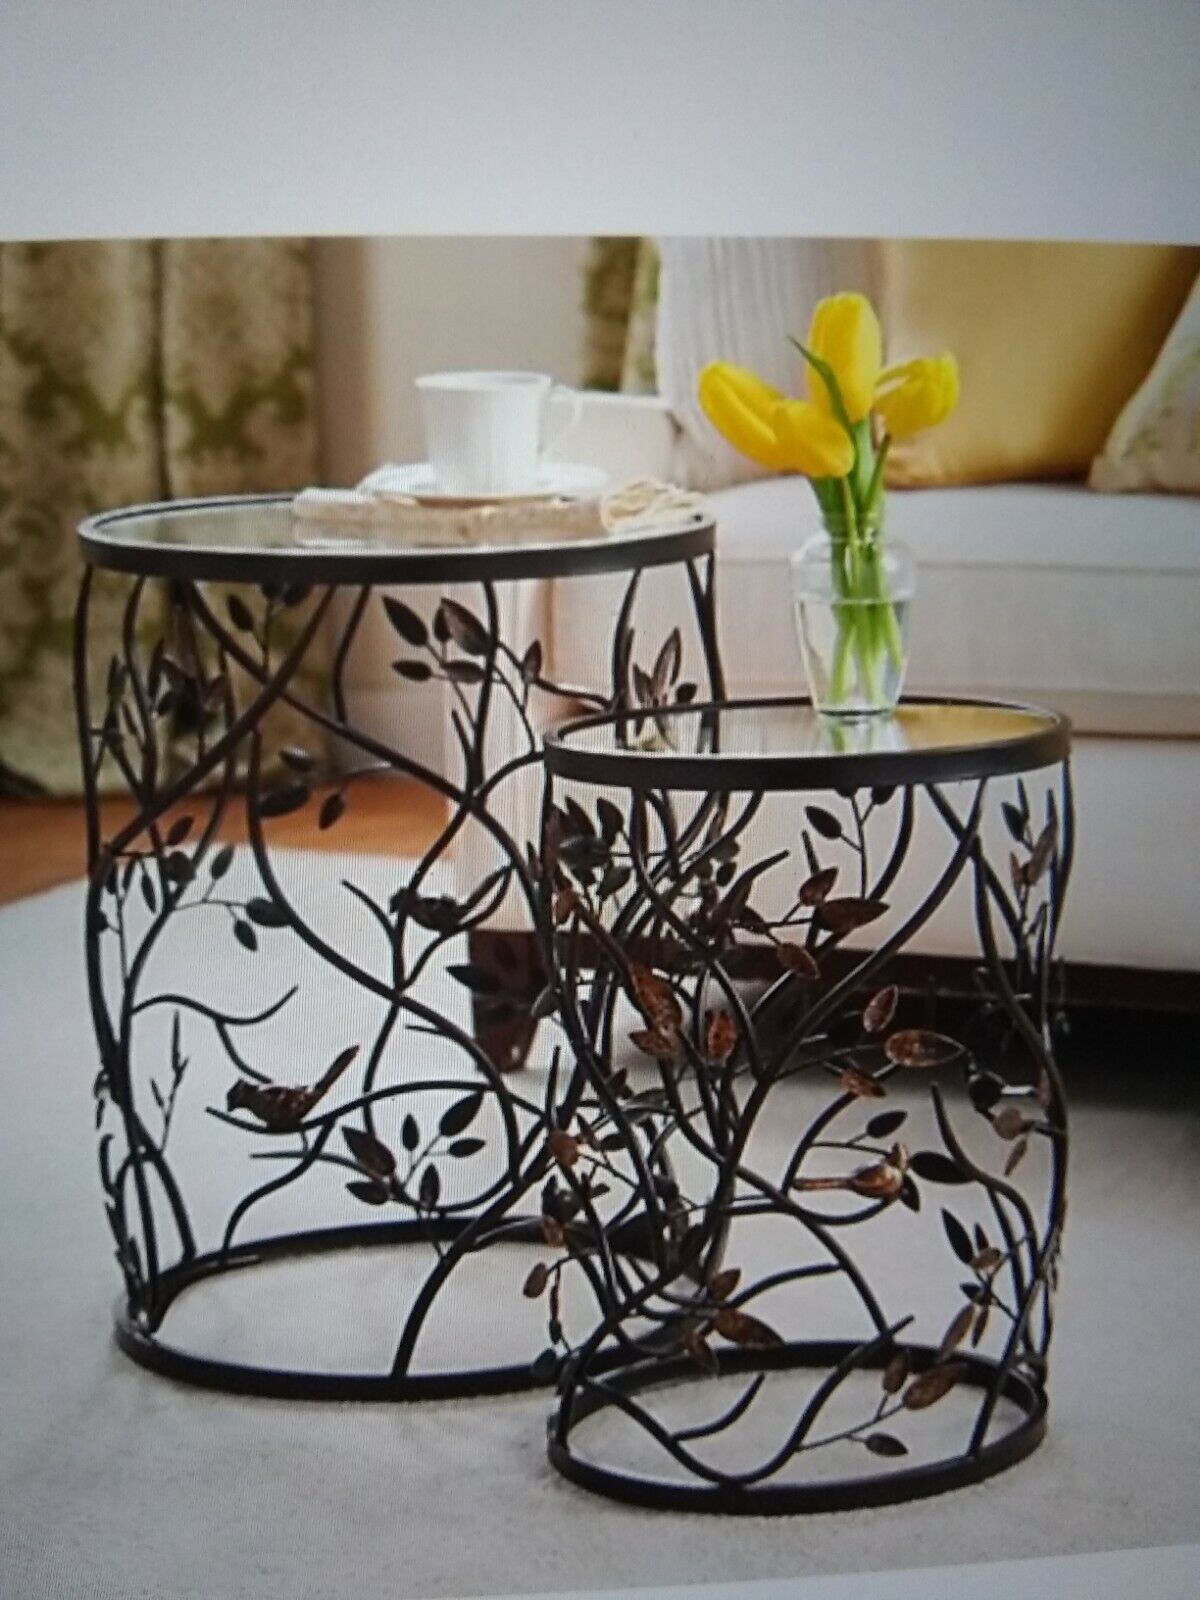 New Shipping Free Valerie Parr Hill Indoor-Outdoor Metal Vine Tables 2 PC Ranking TOP5 Bird